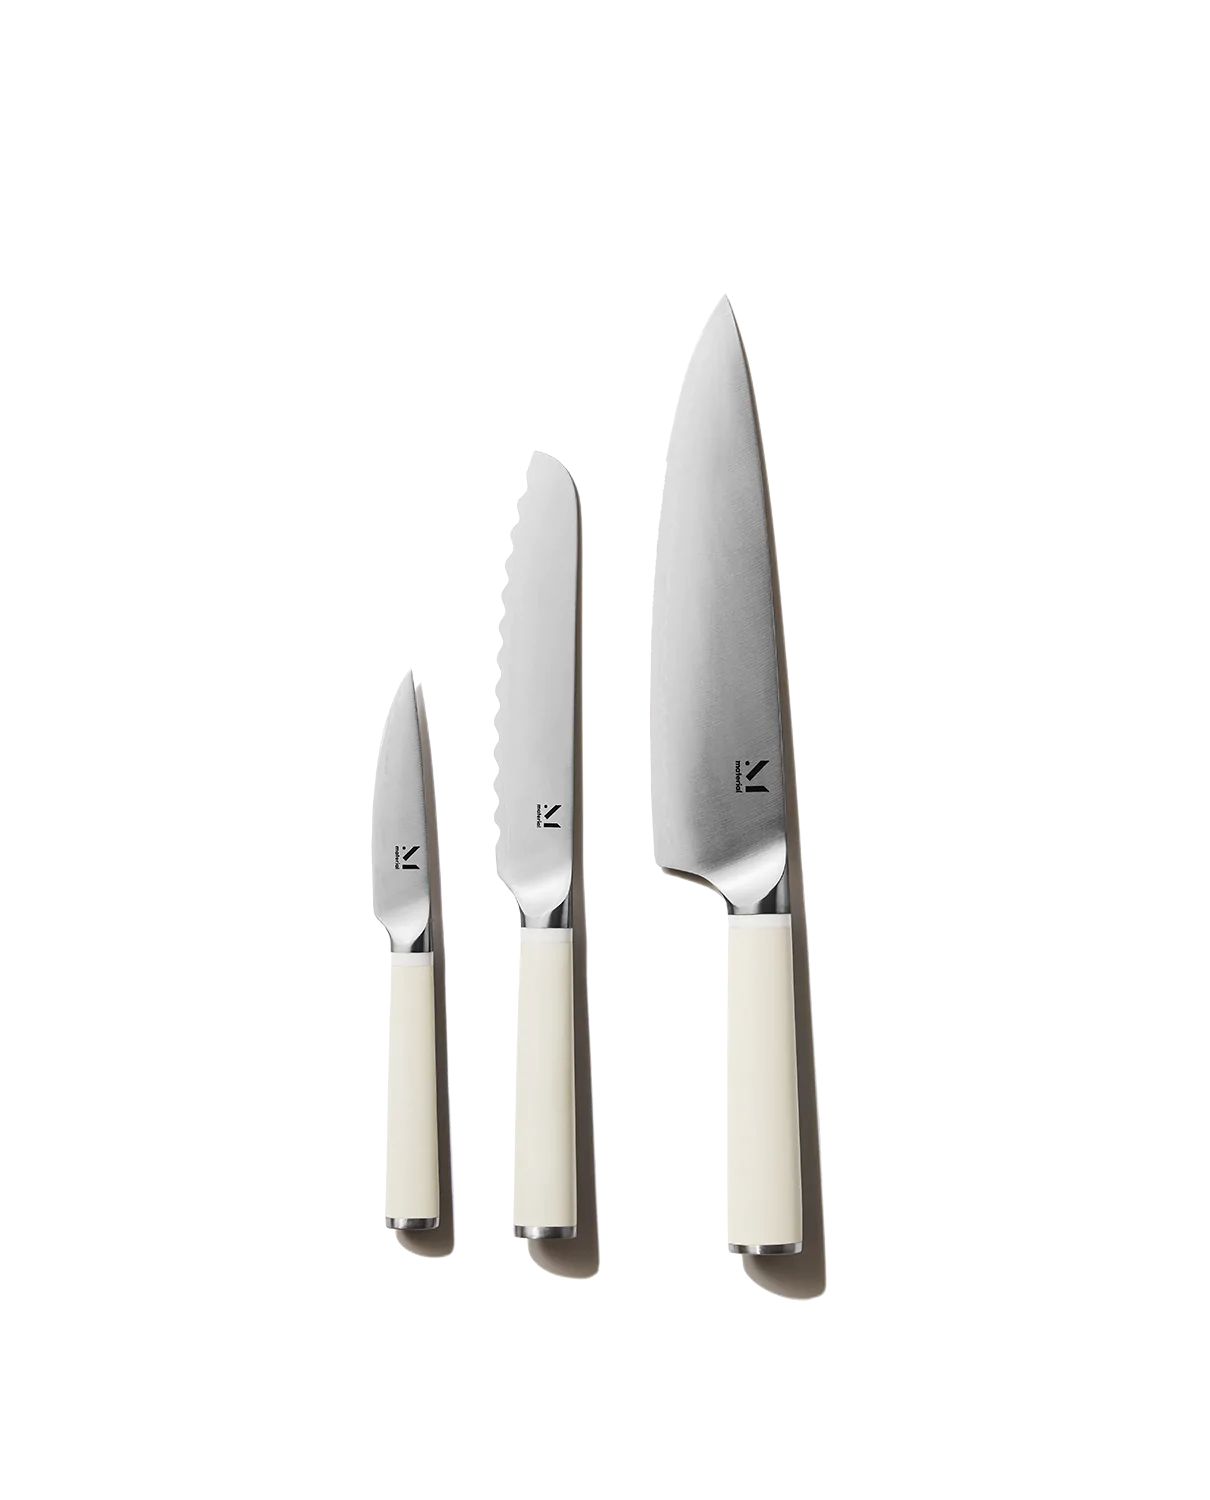 The Knives: Thoughtfully Designed, Affordably Priced | Material